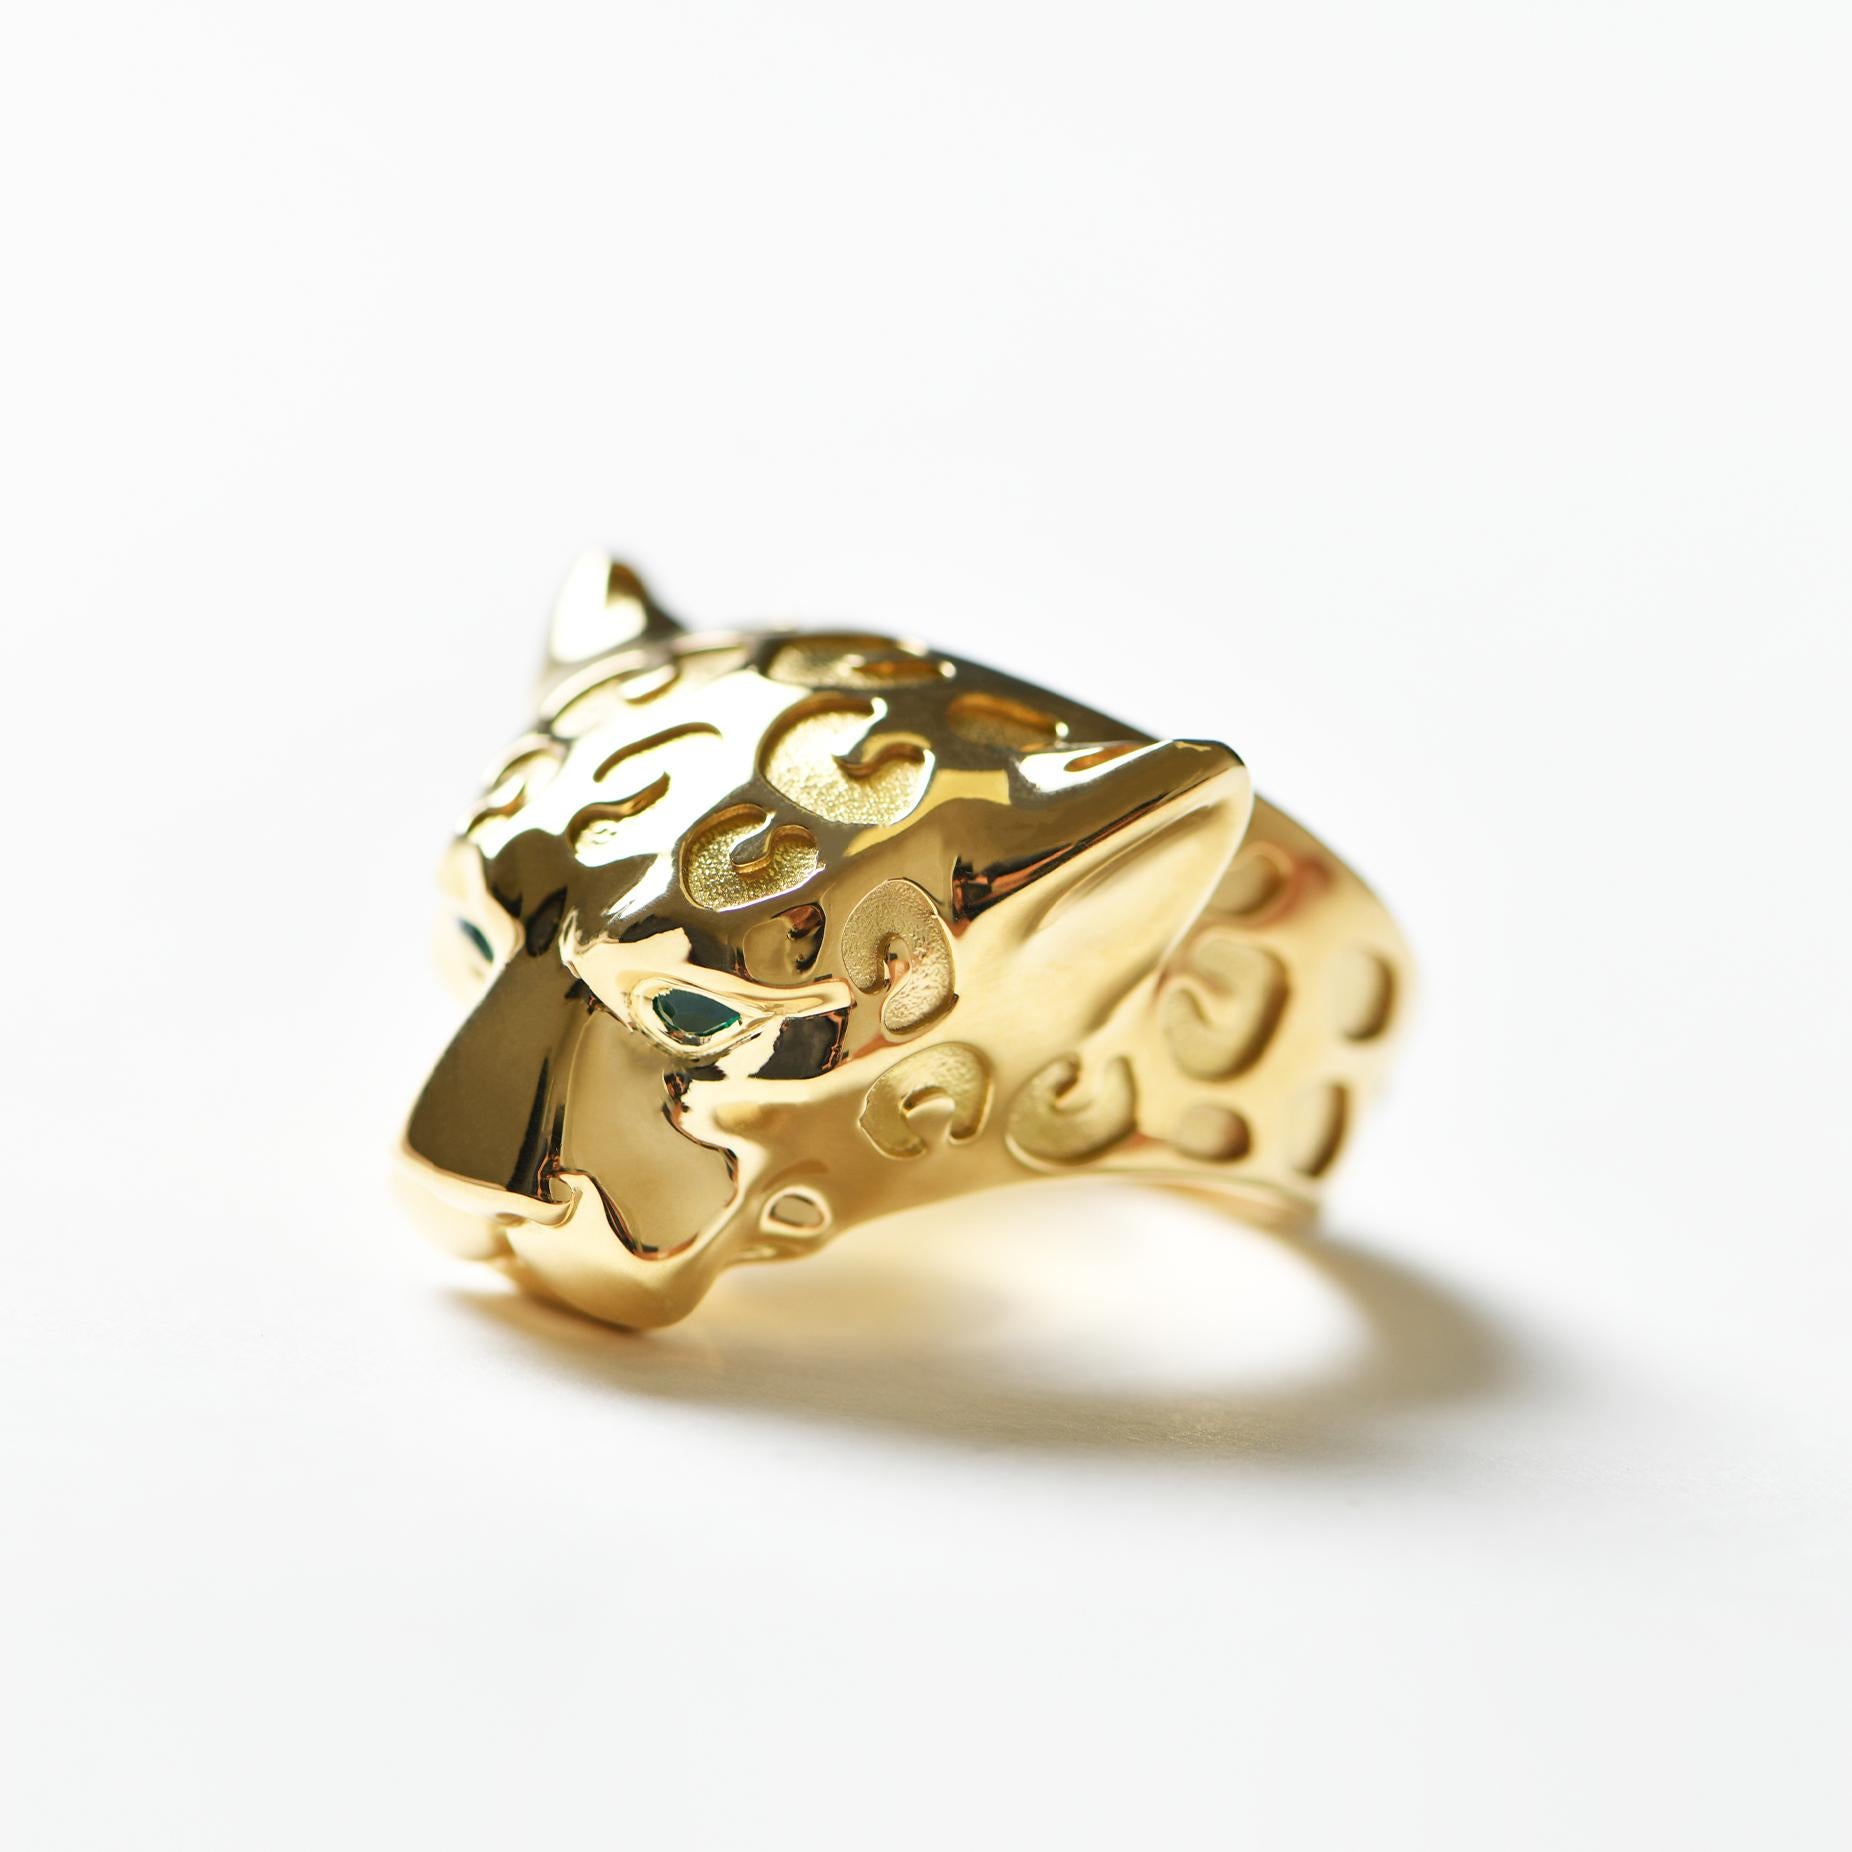 Modern 18K Yellow Gold Jaguar Ring by Tane For Sale